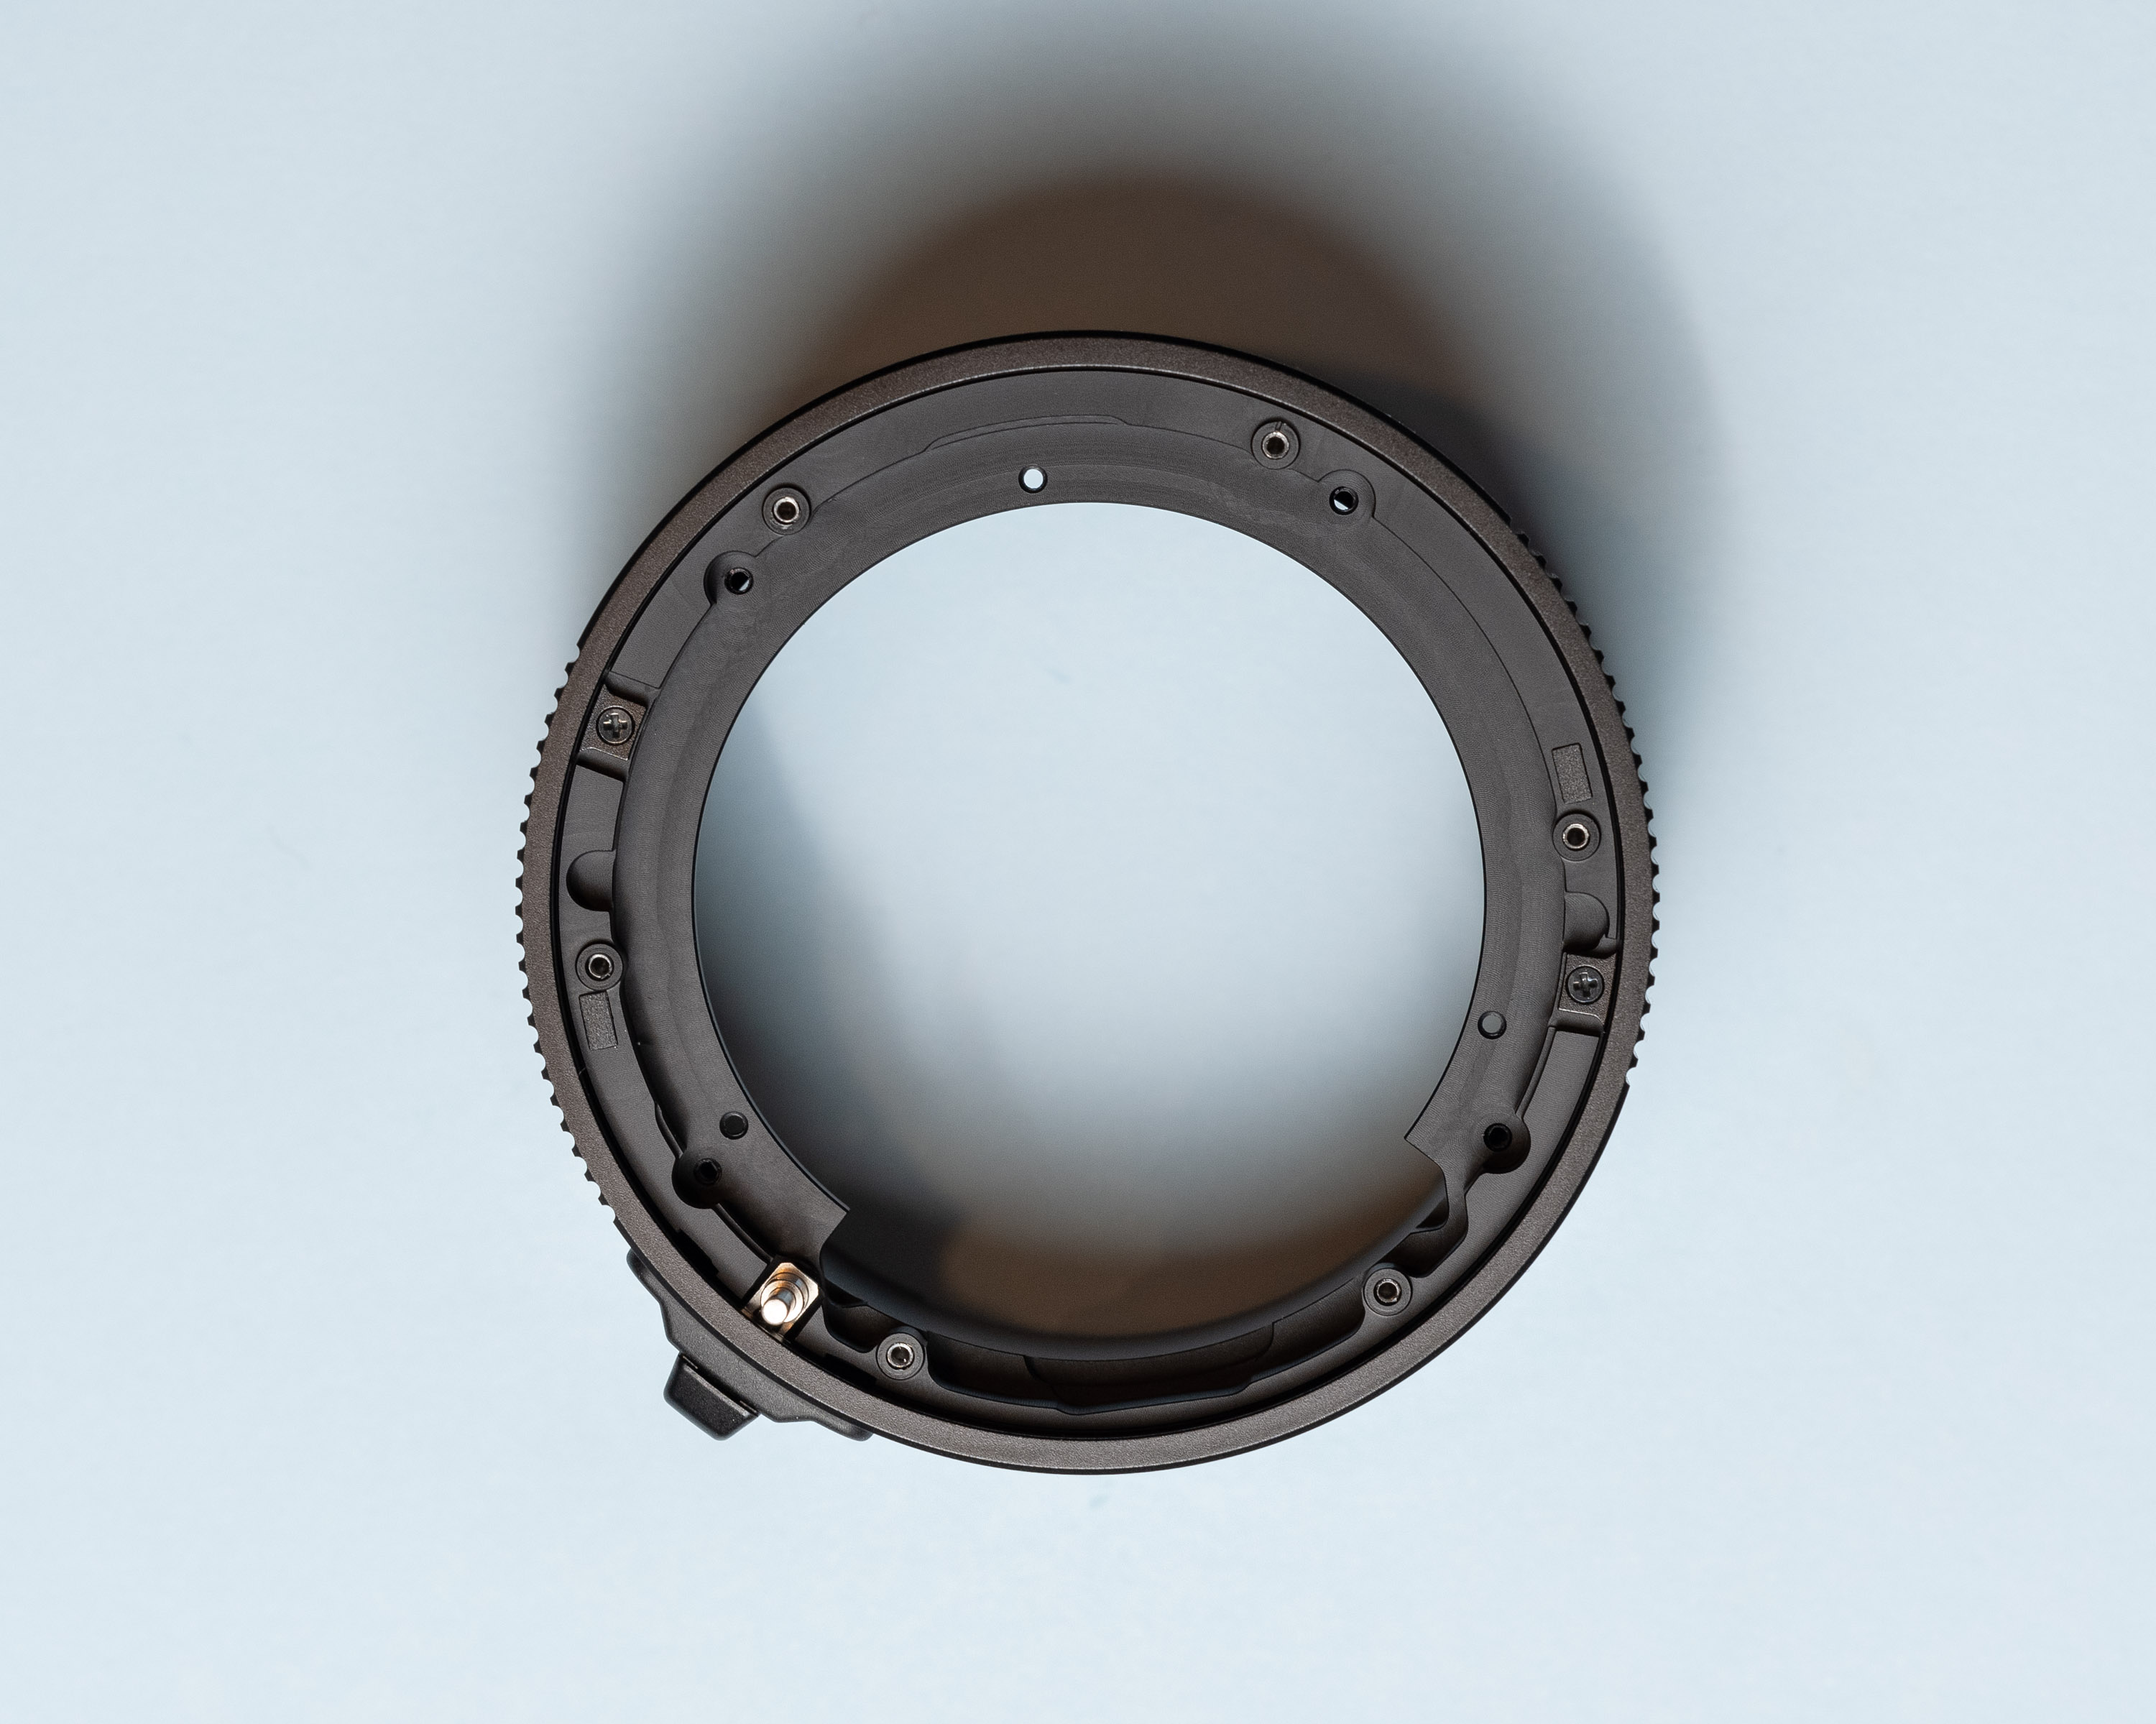 Top down view of black anodized extension tube with most parts removed